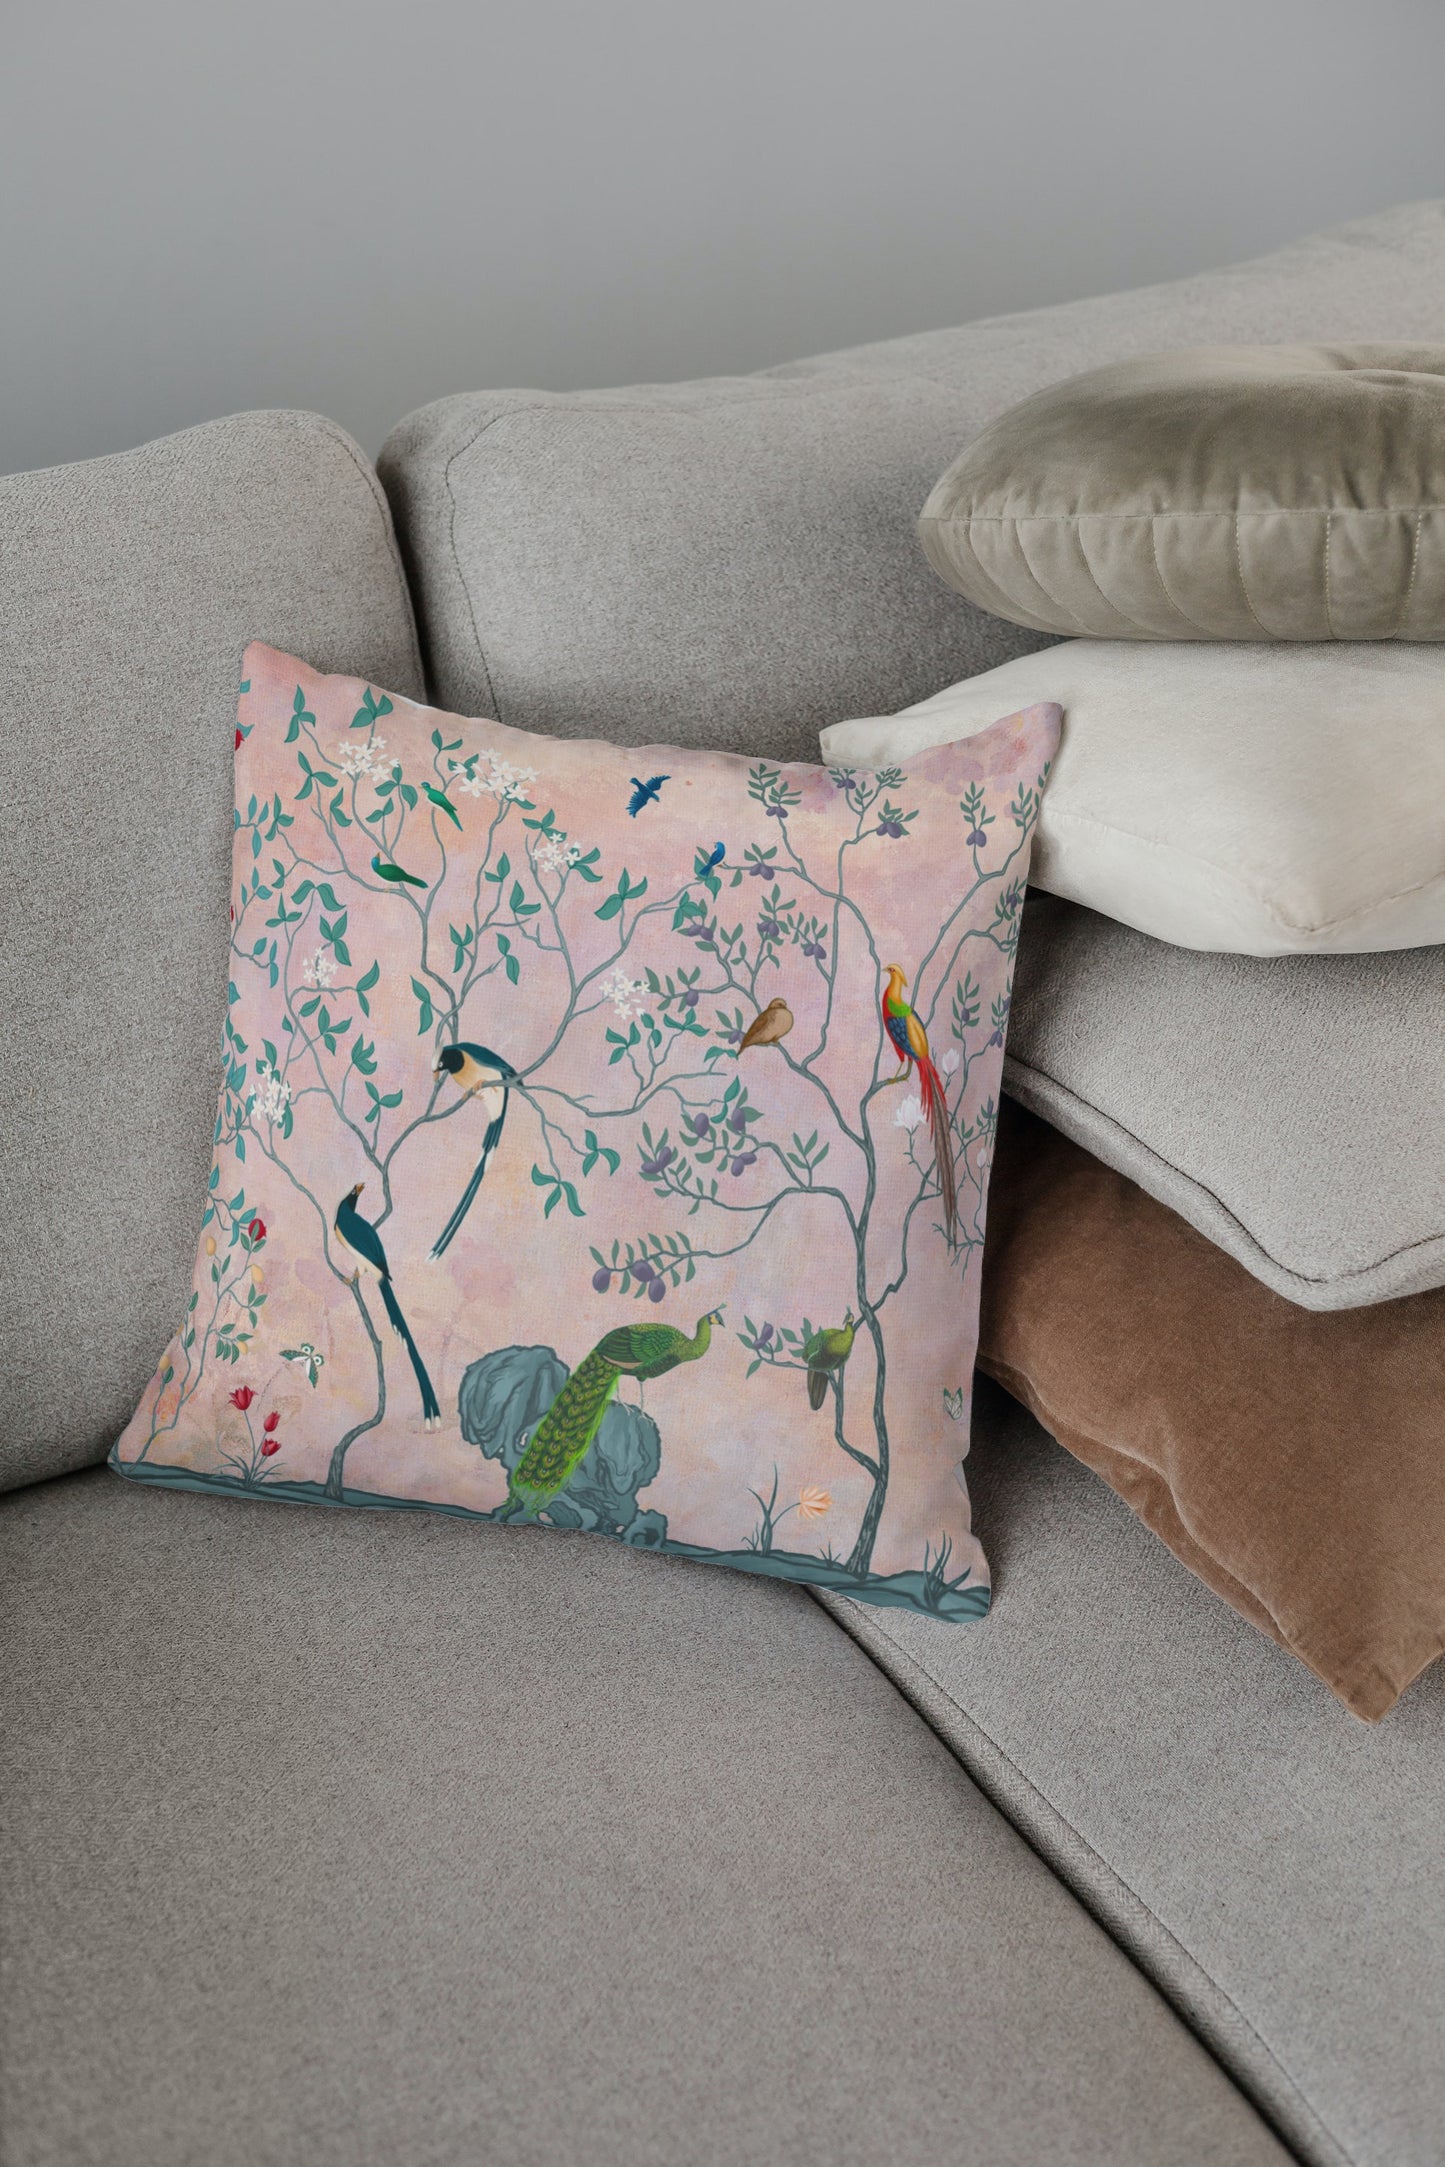 Chinoiserie Peacock Cotton Pillows Pink Blush